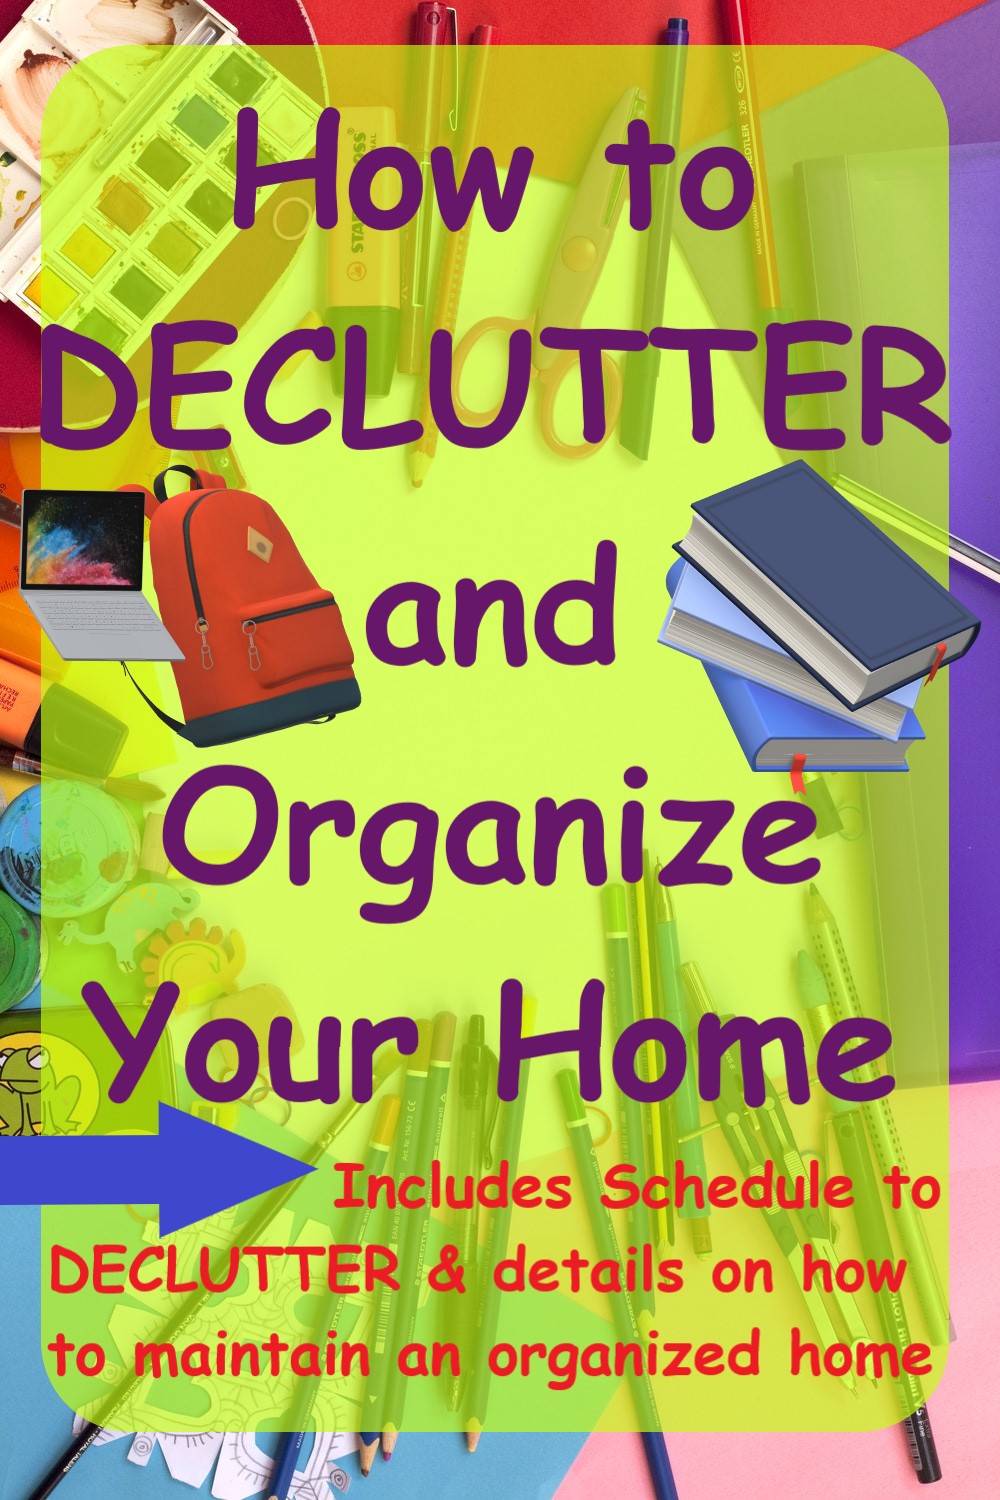 Multicolored paper, pens, markers, colored pencils, paint, erasers, laptop, bookbag, books, etc. scattered over a white surface. A translucent yellow rectangle over scattered stuff has purple text that reads How to DECLUTTER and Organize Your Home. A blue arrow points to smaller red text that reads Includes Schedule to DECLUTTER & details on how to maintain an organized home